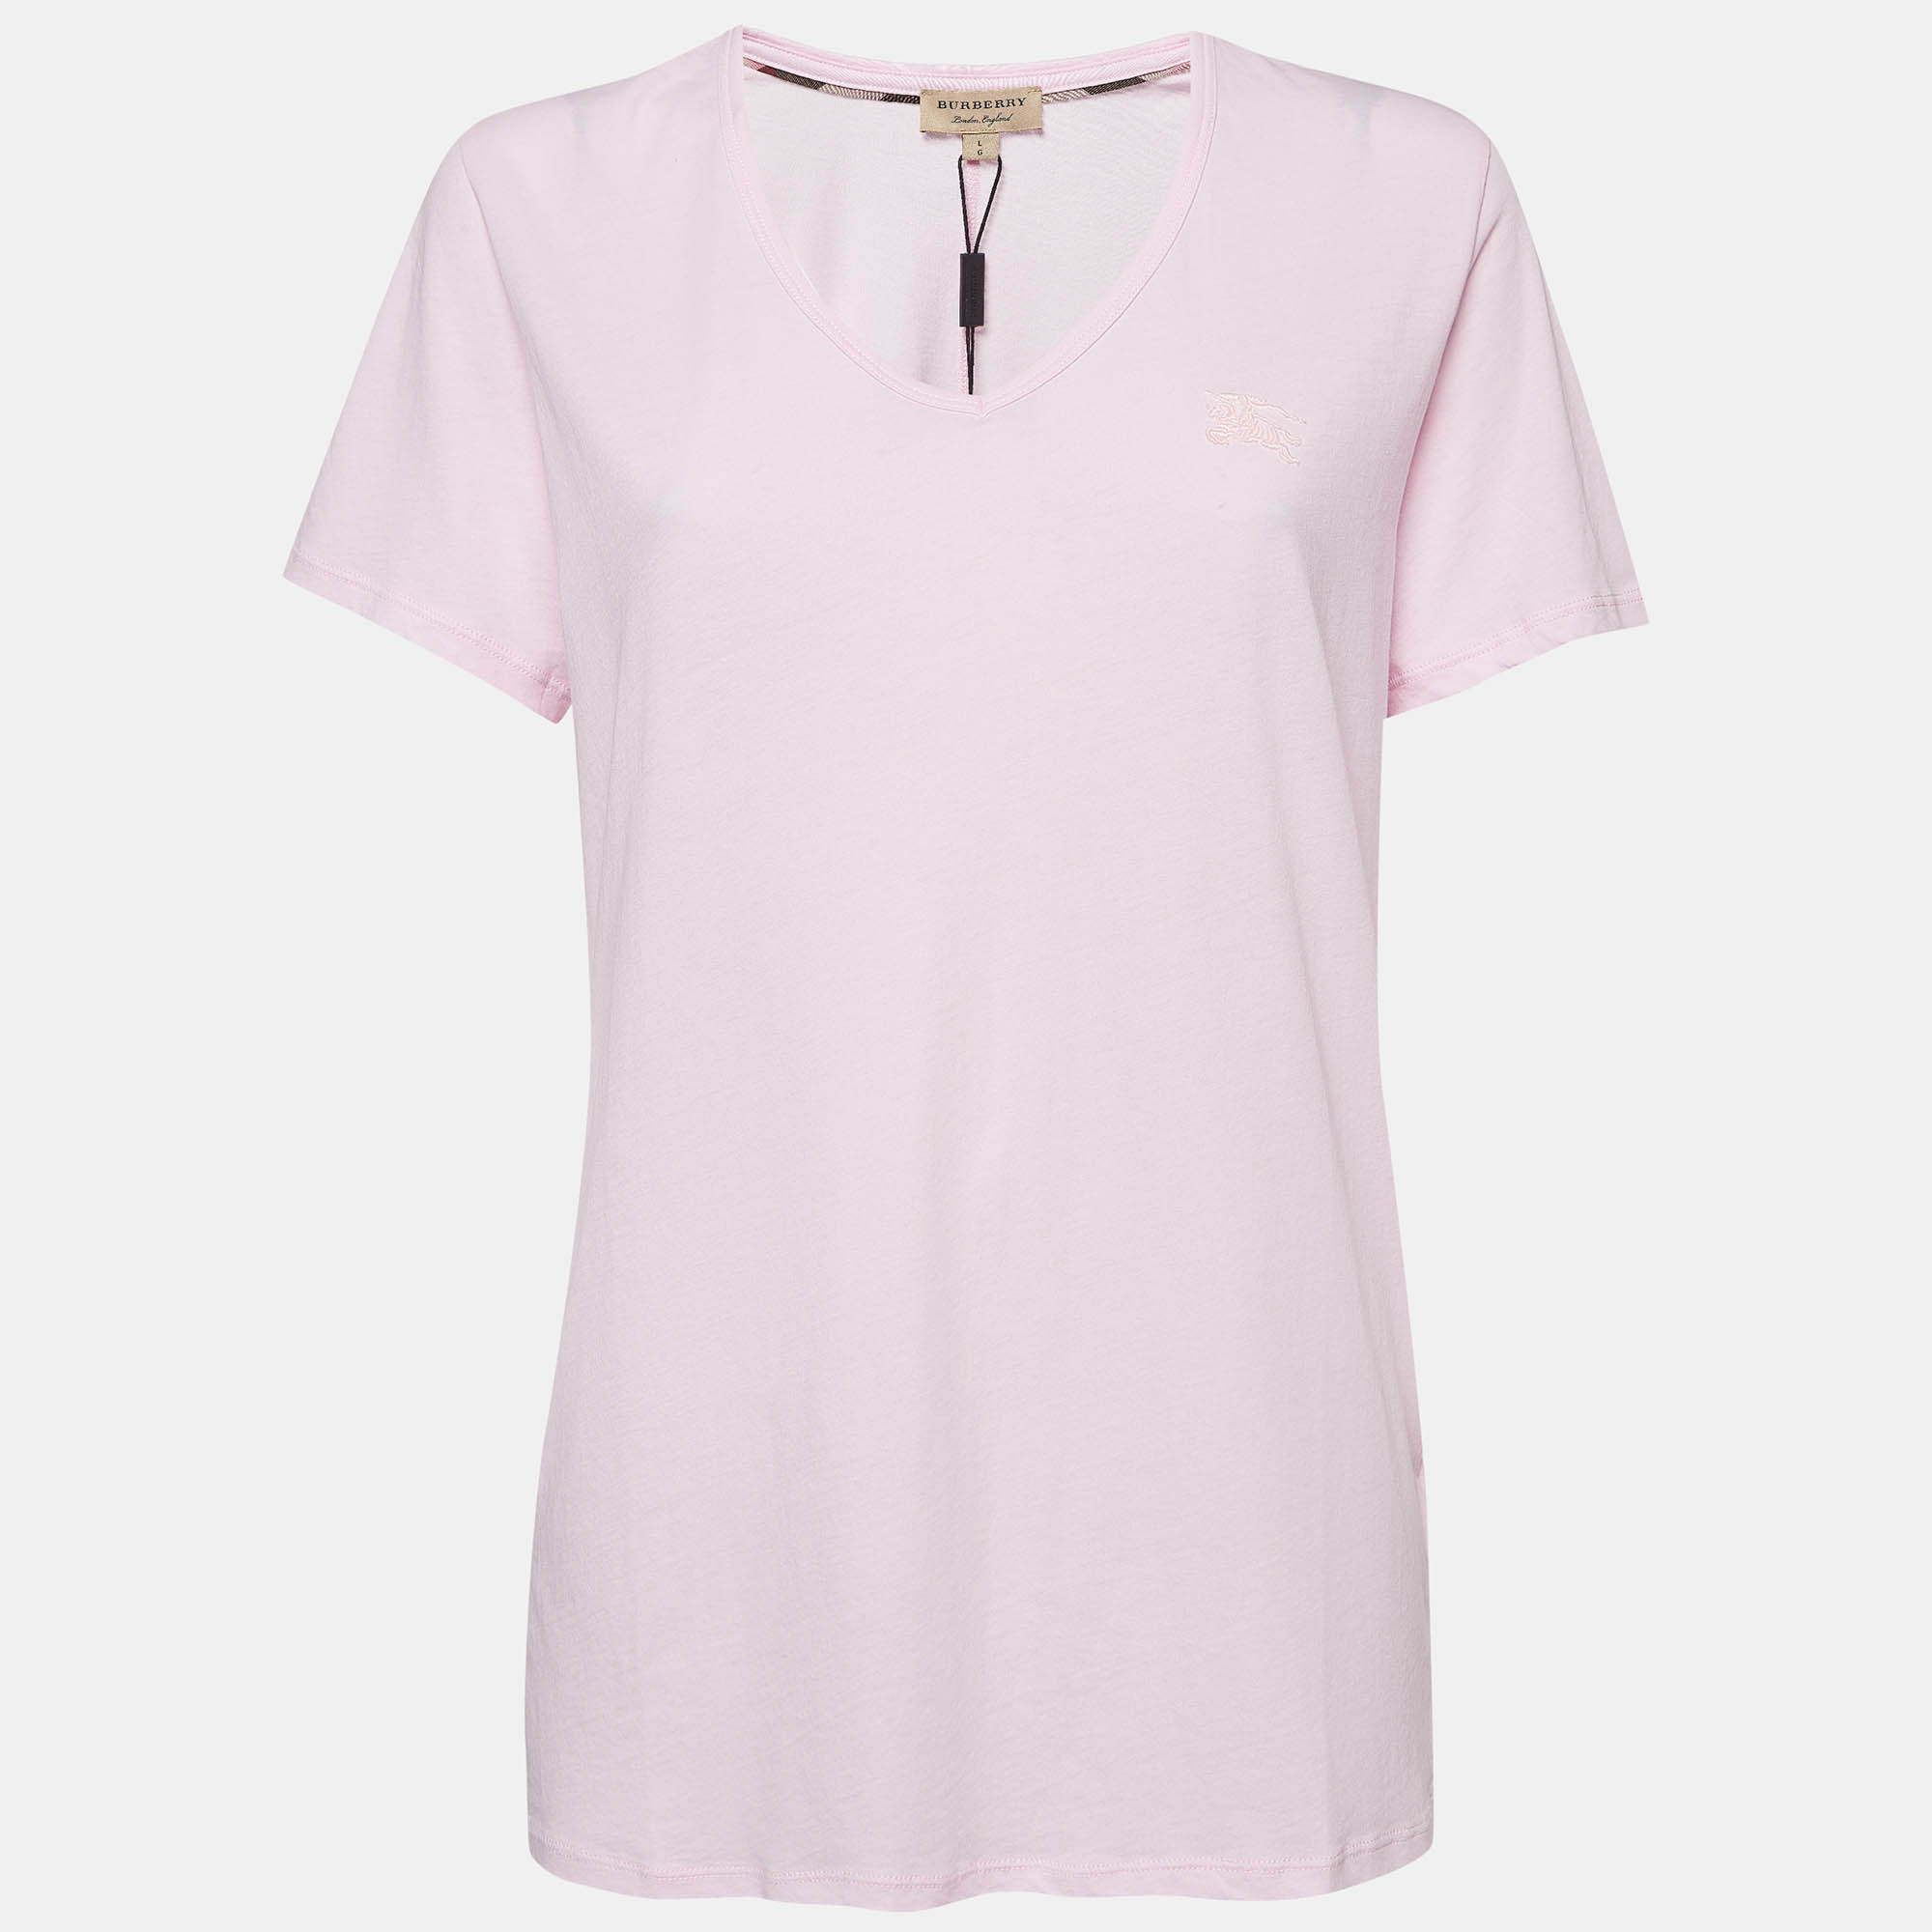 Burberry Pink Embroidered Cotton V-Neck T-Shirt L   